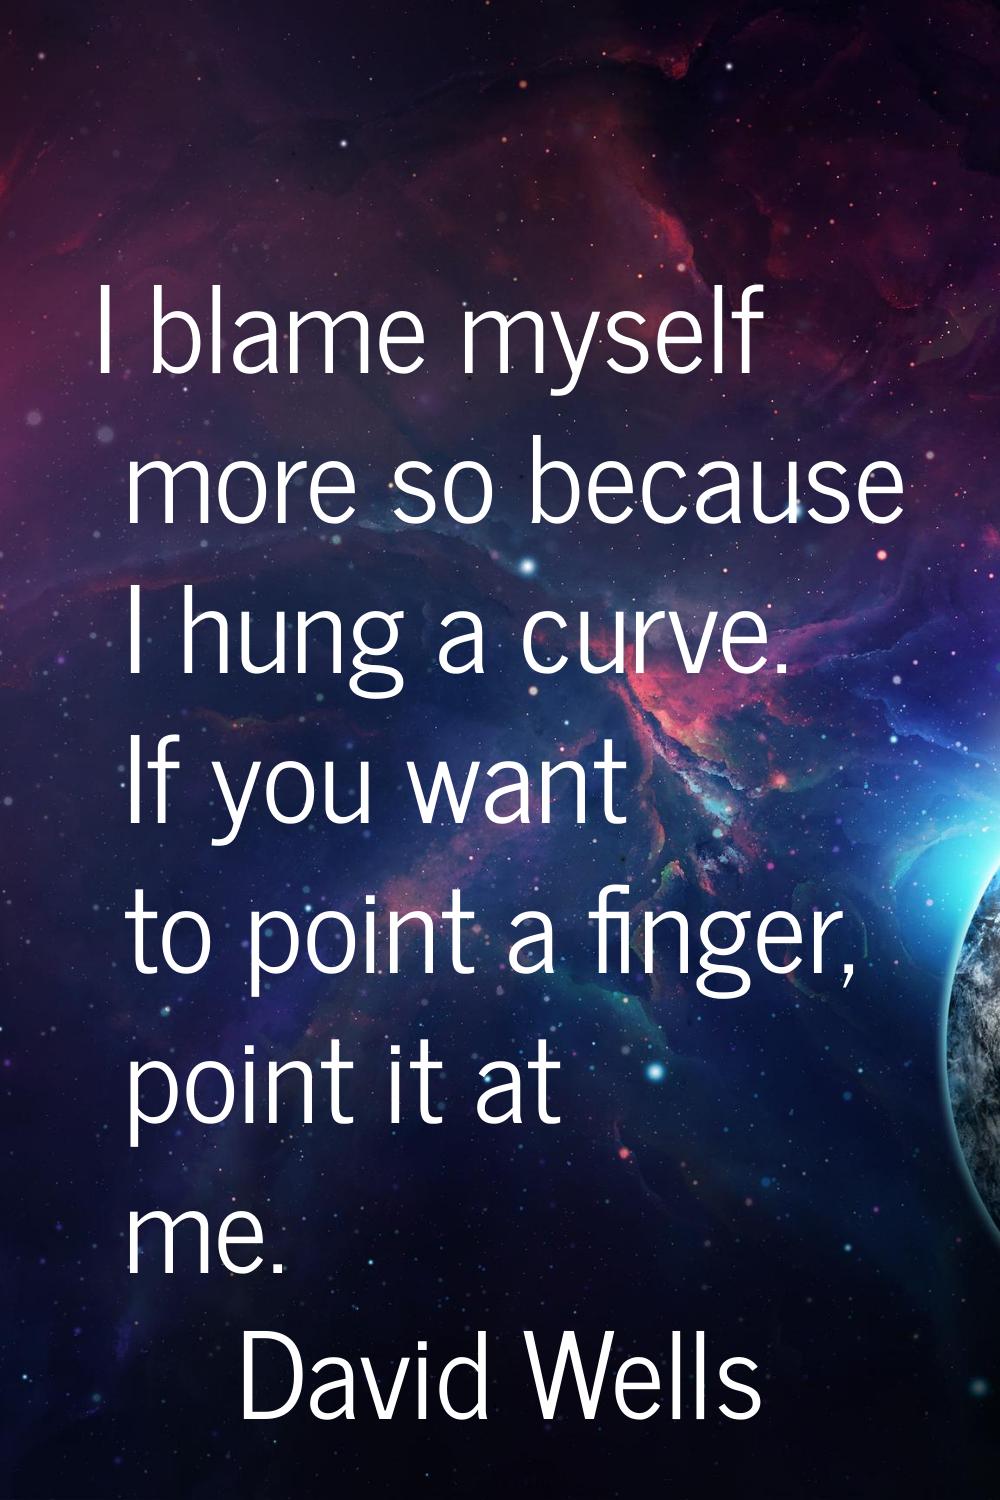 I blame myself more so because I hung a curve. If you want to point a finger, point it at me.